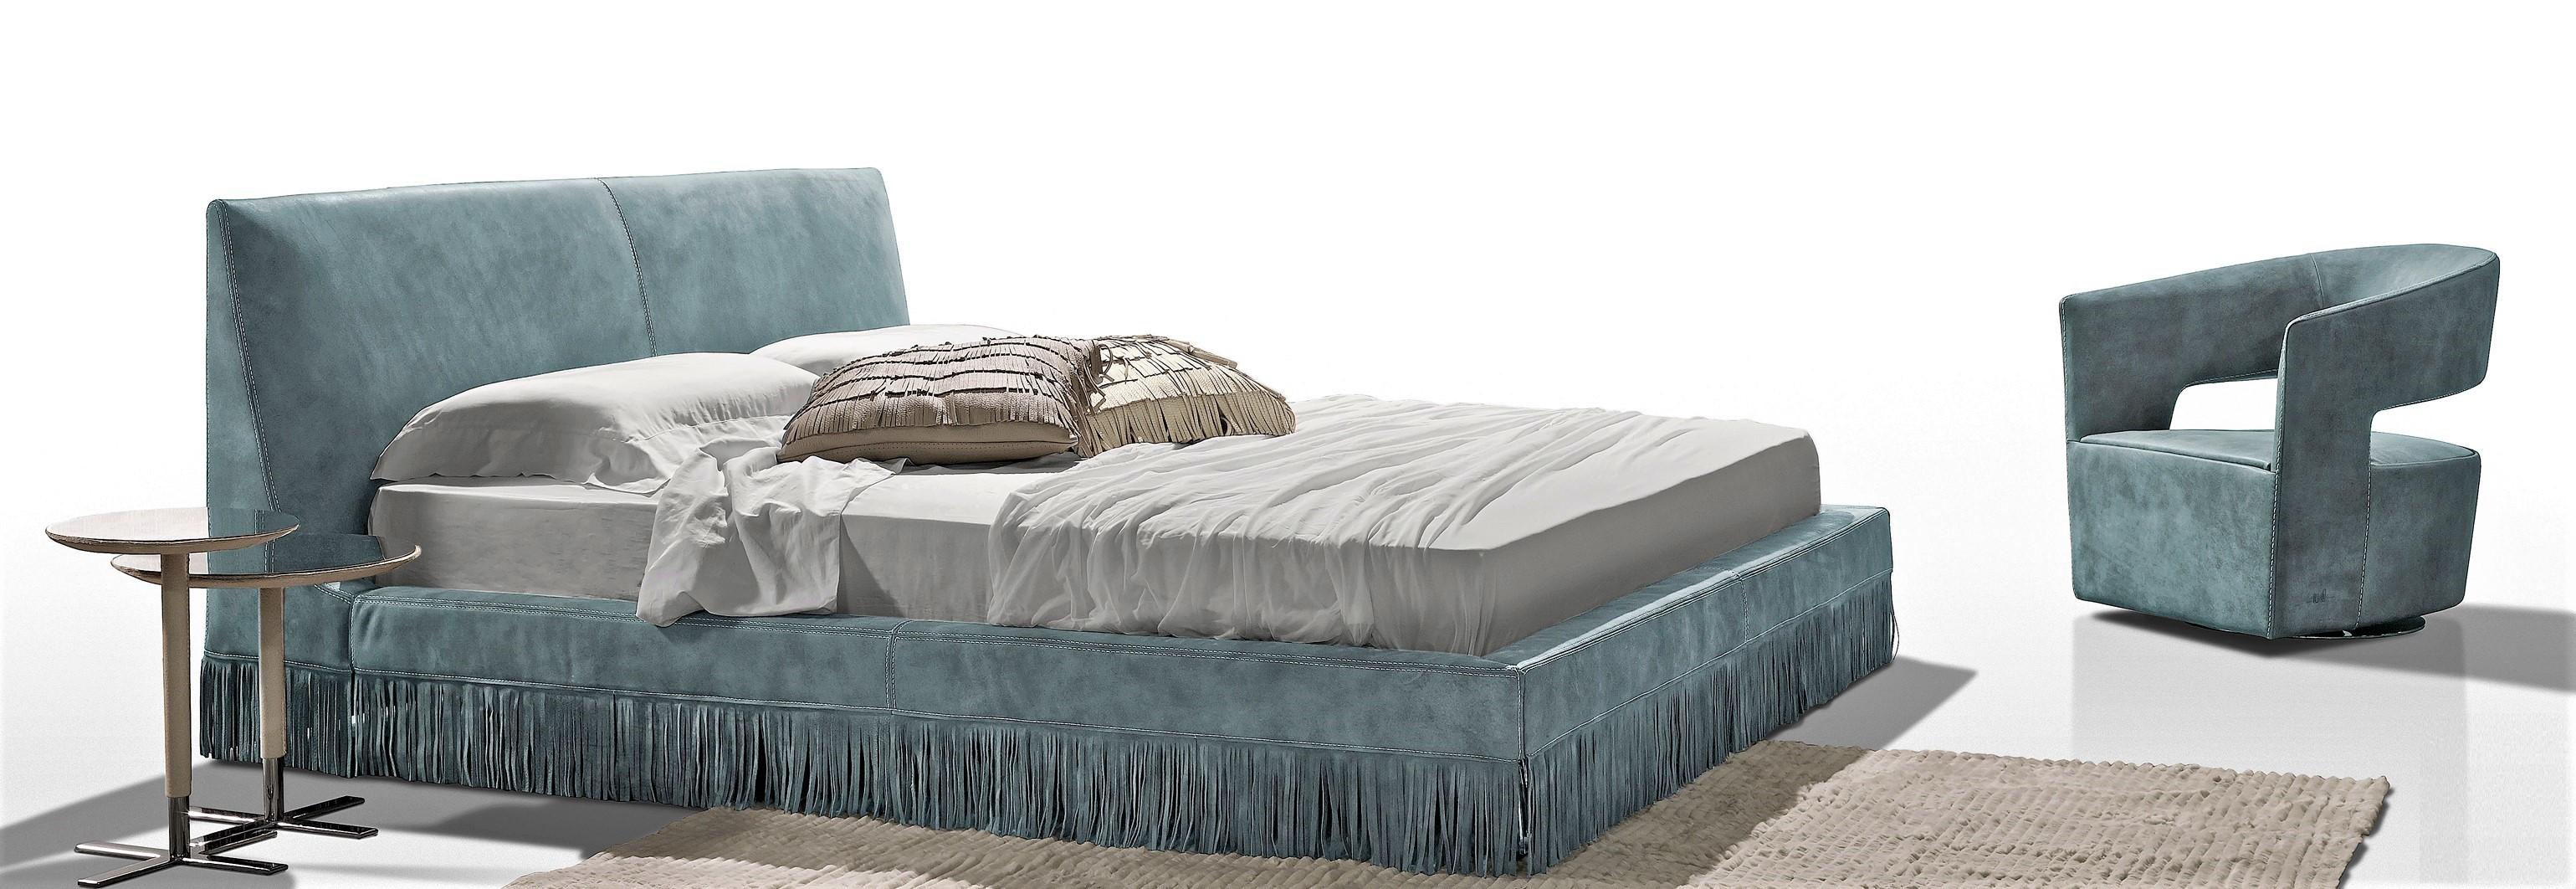 Couture, glamorous and tailor made this king size bed is full of contemporary flare and on-trend detailing. The high quality use of leather hide is complemented by an opulent fringe skirt that surrounds the bed along the base. 

Dipping into the